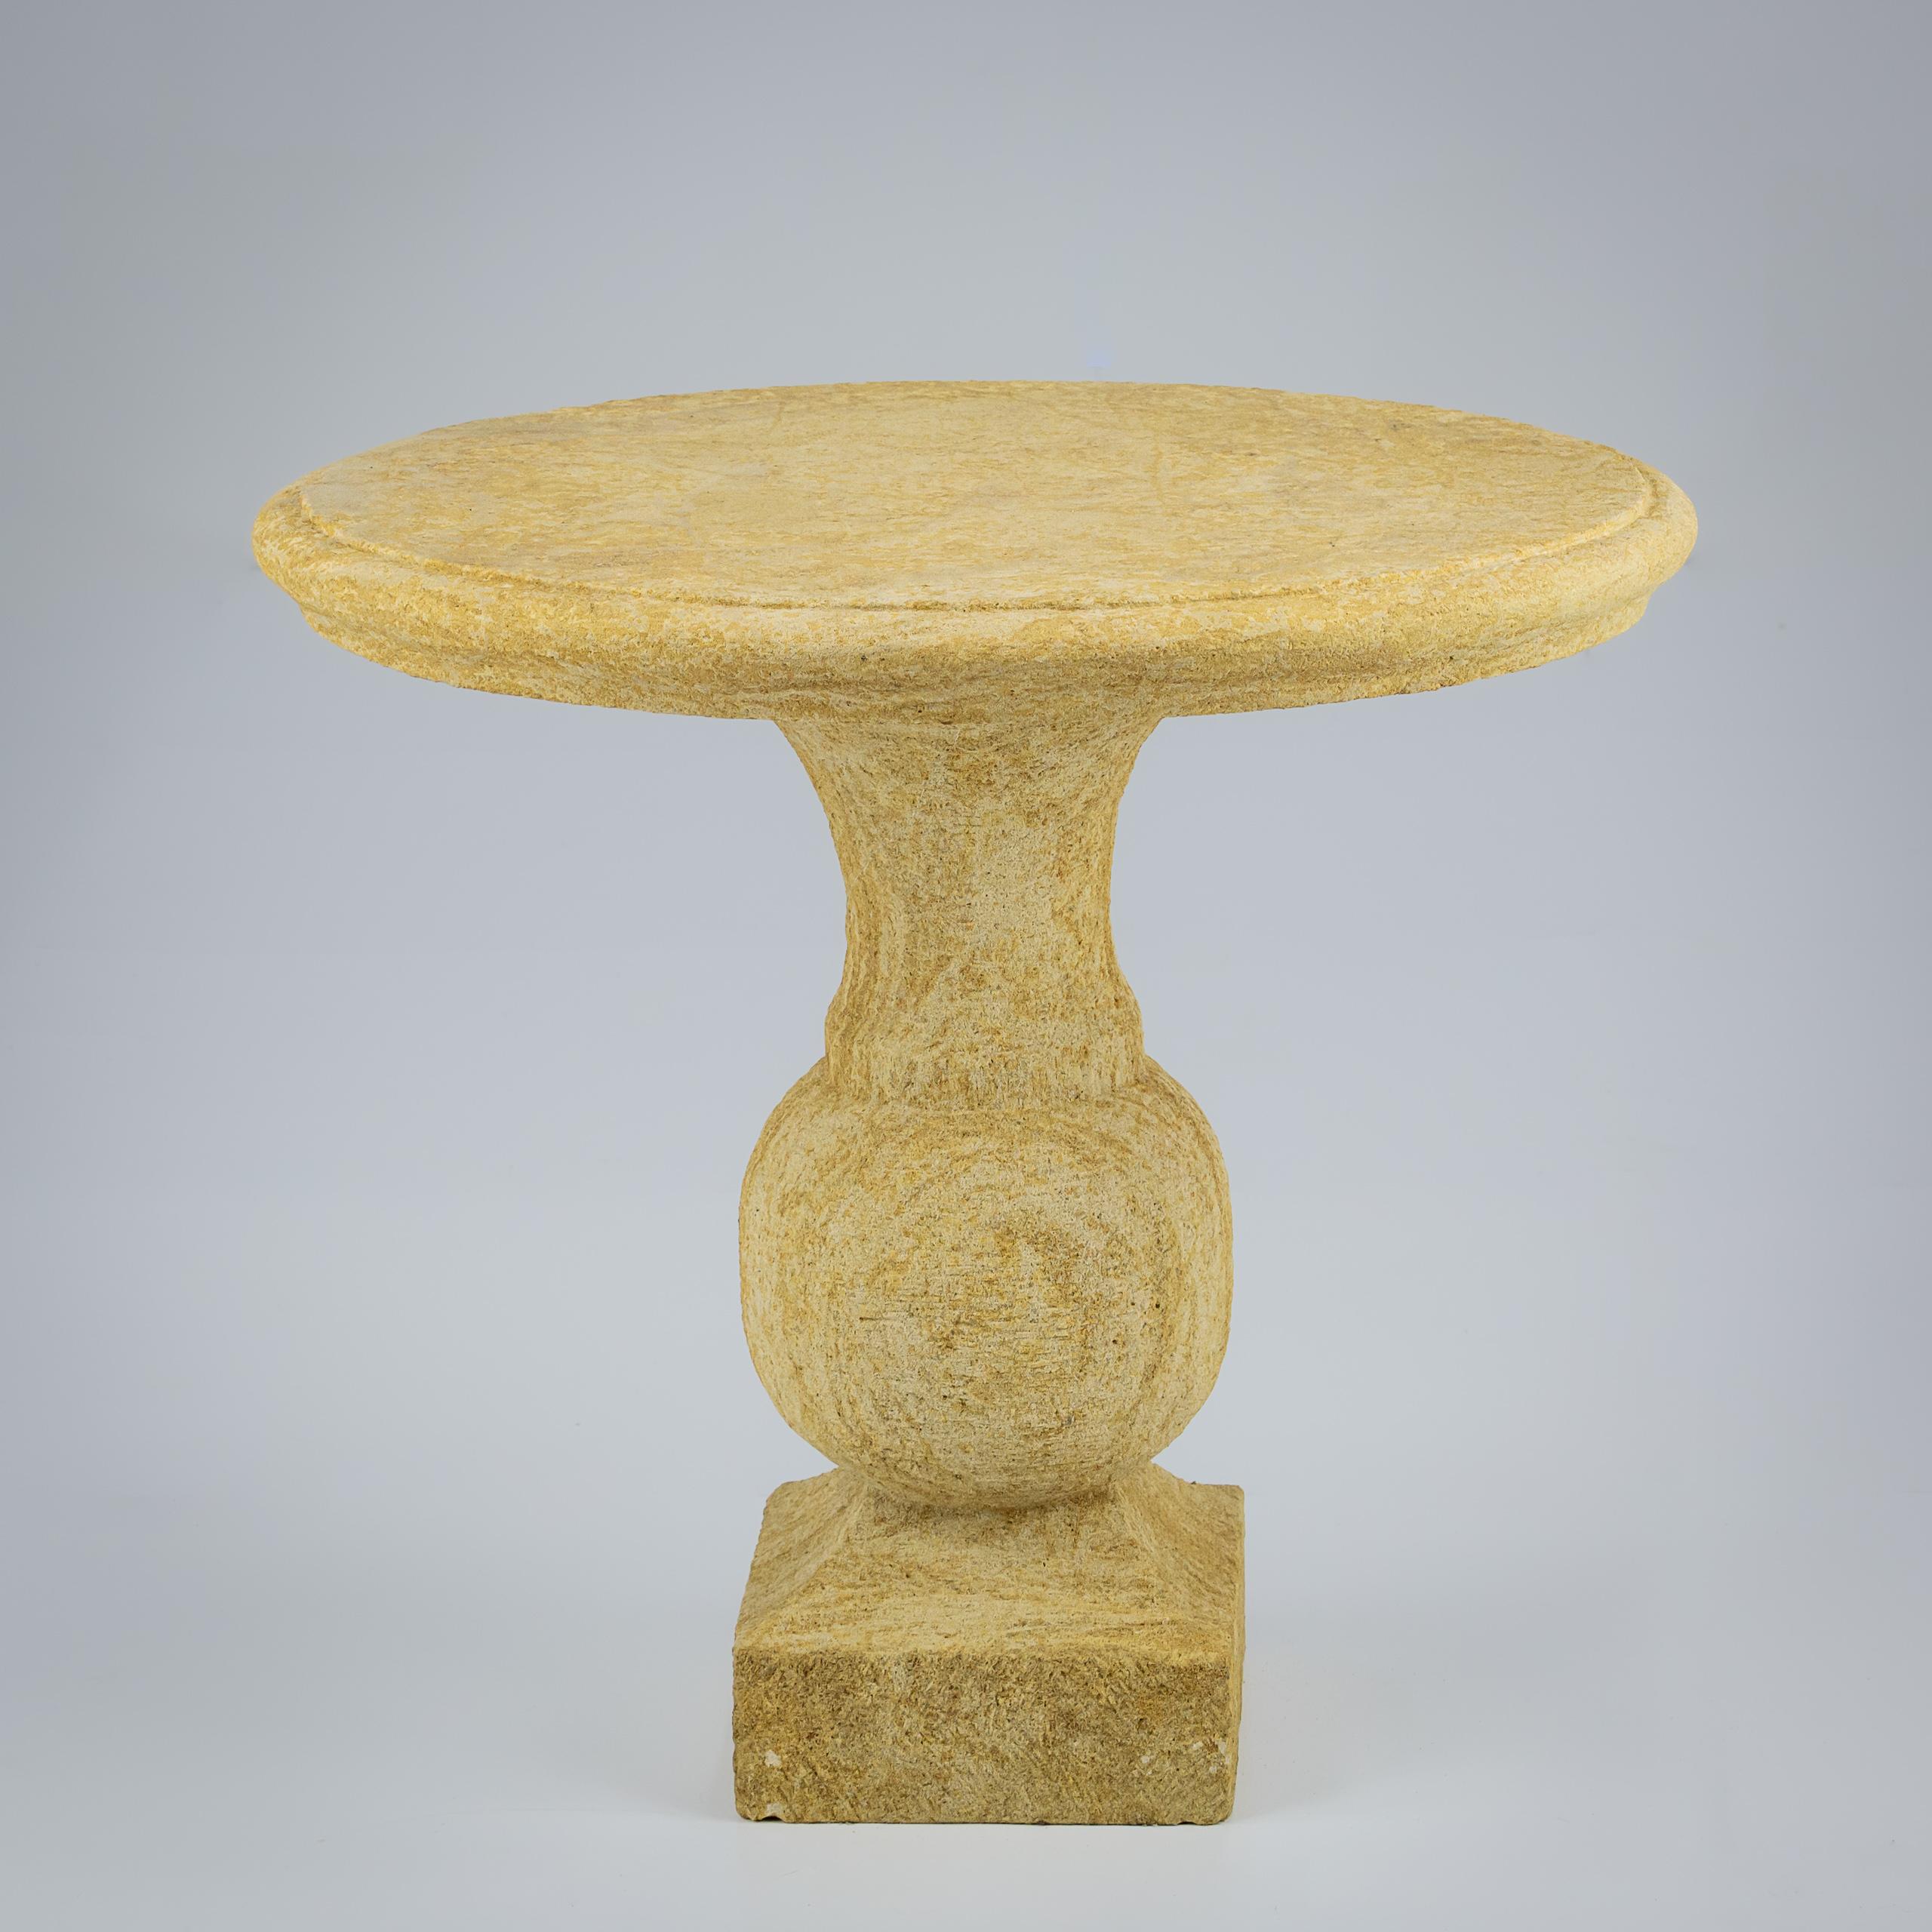 English Hand Carved Golden Cotswold Oolitic Limestone Table For Sale